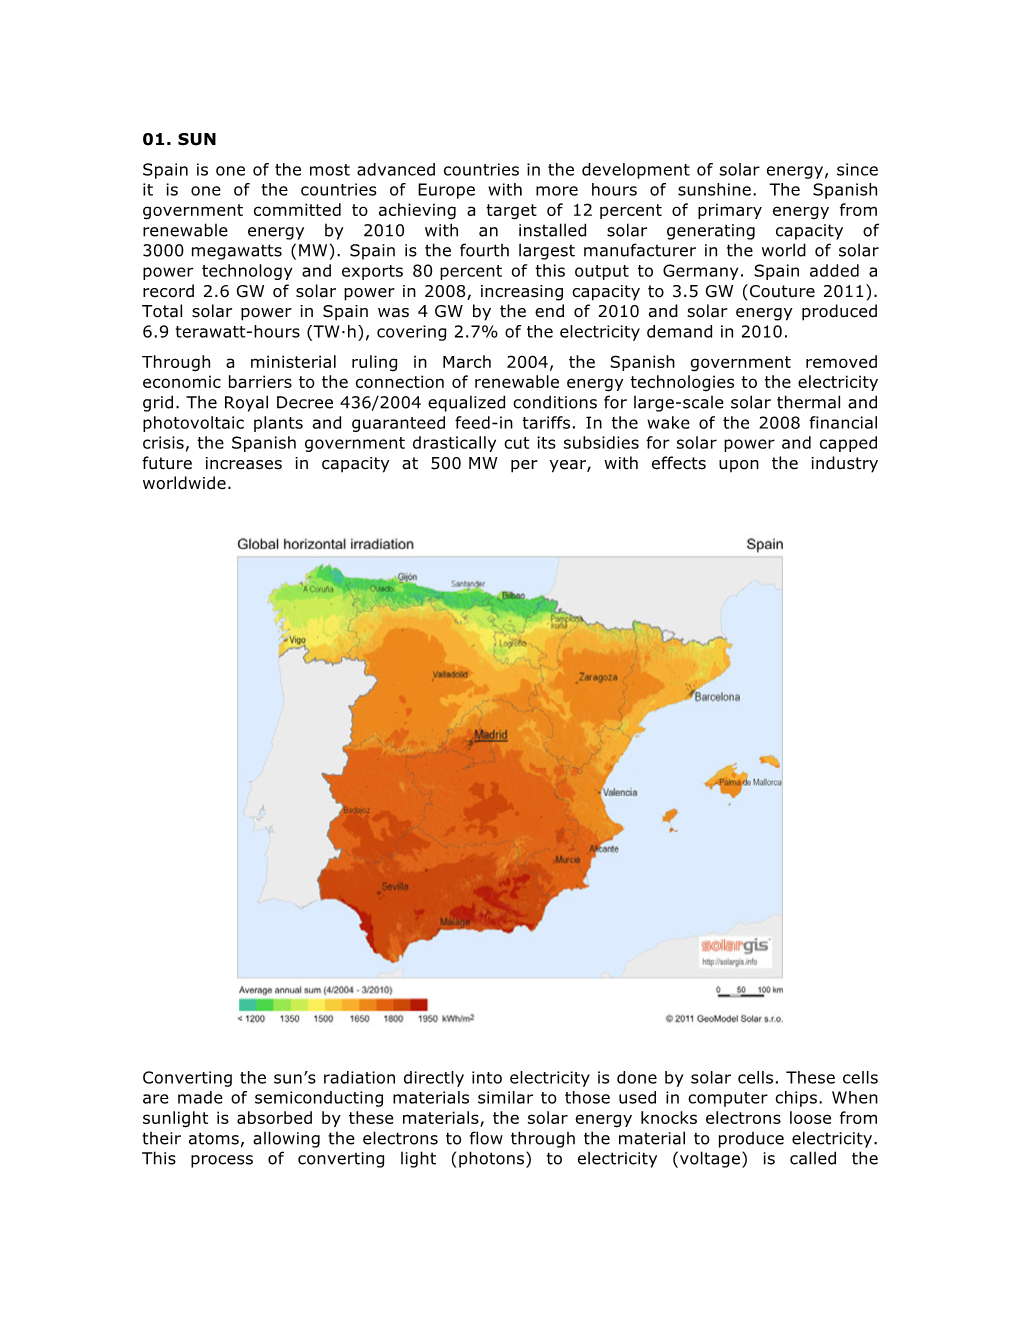 01. SUN Spain Is One of the Most Advanced Countries in the Development of Solar Energy, Since It Is One of the Countries of Europe with More Hours of Sunshine